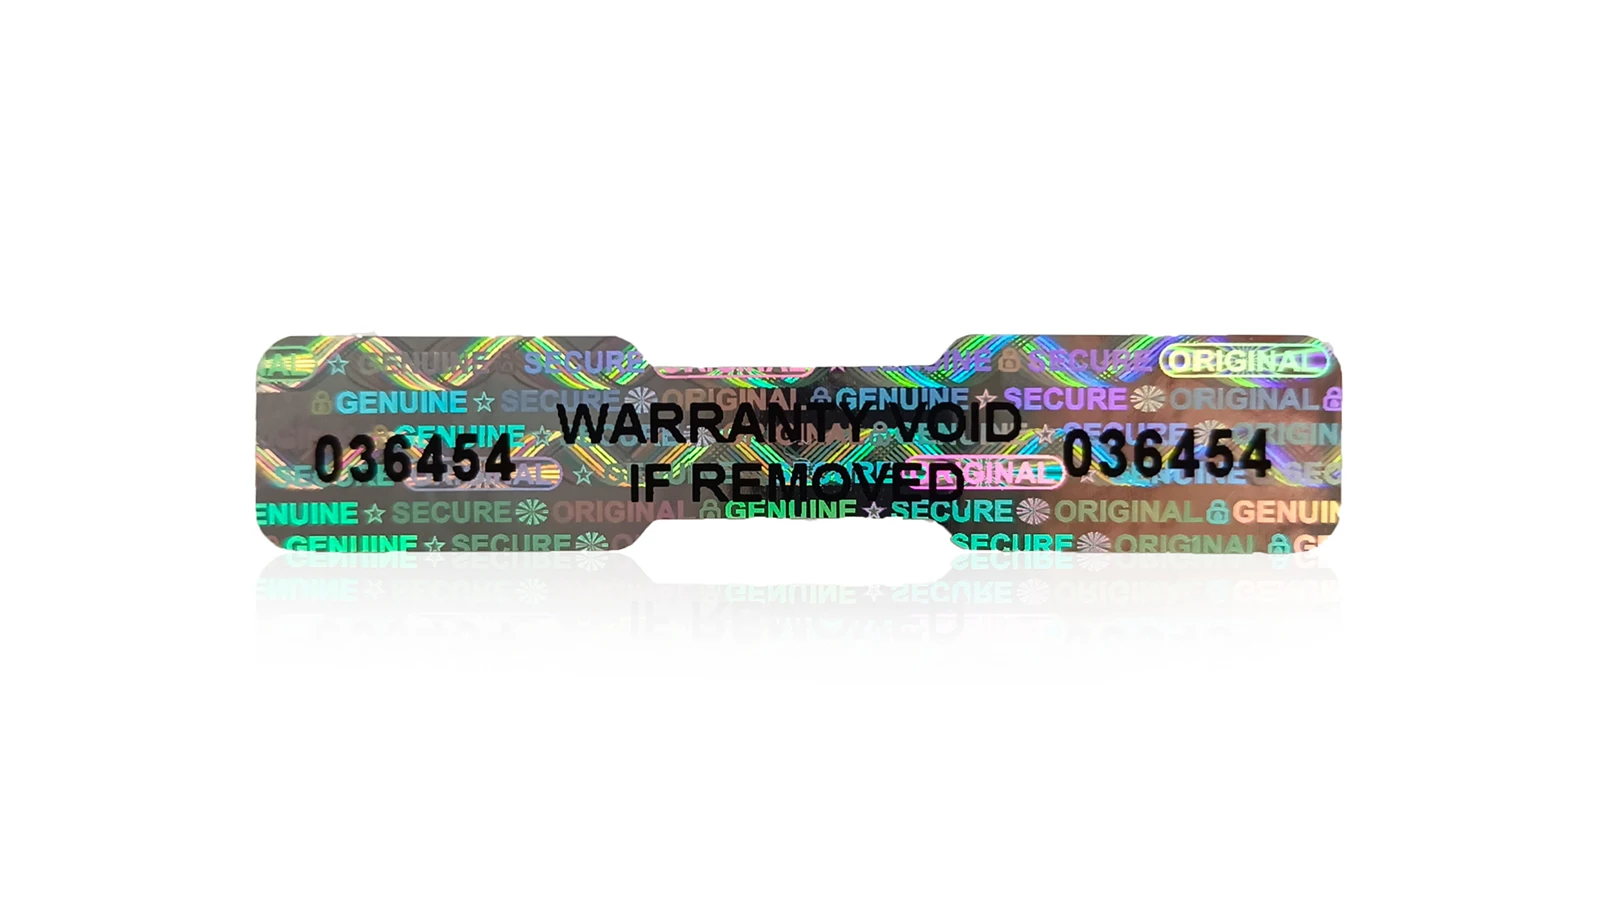 50x10mm Laser Security Label Tamper-Proof Holographic Warranty Void Stickers with Unique Serial Number Void Seal Adhesive labels